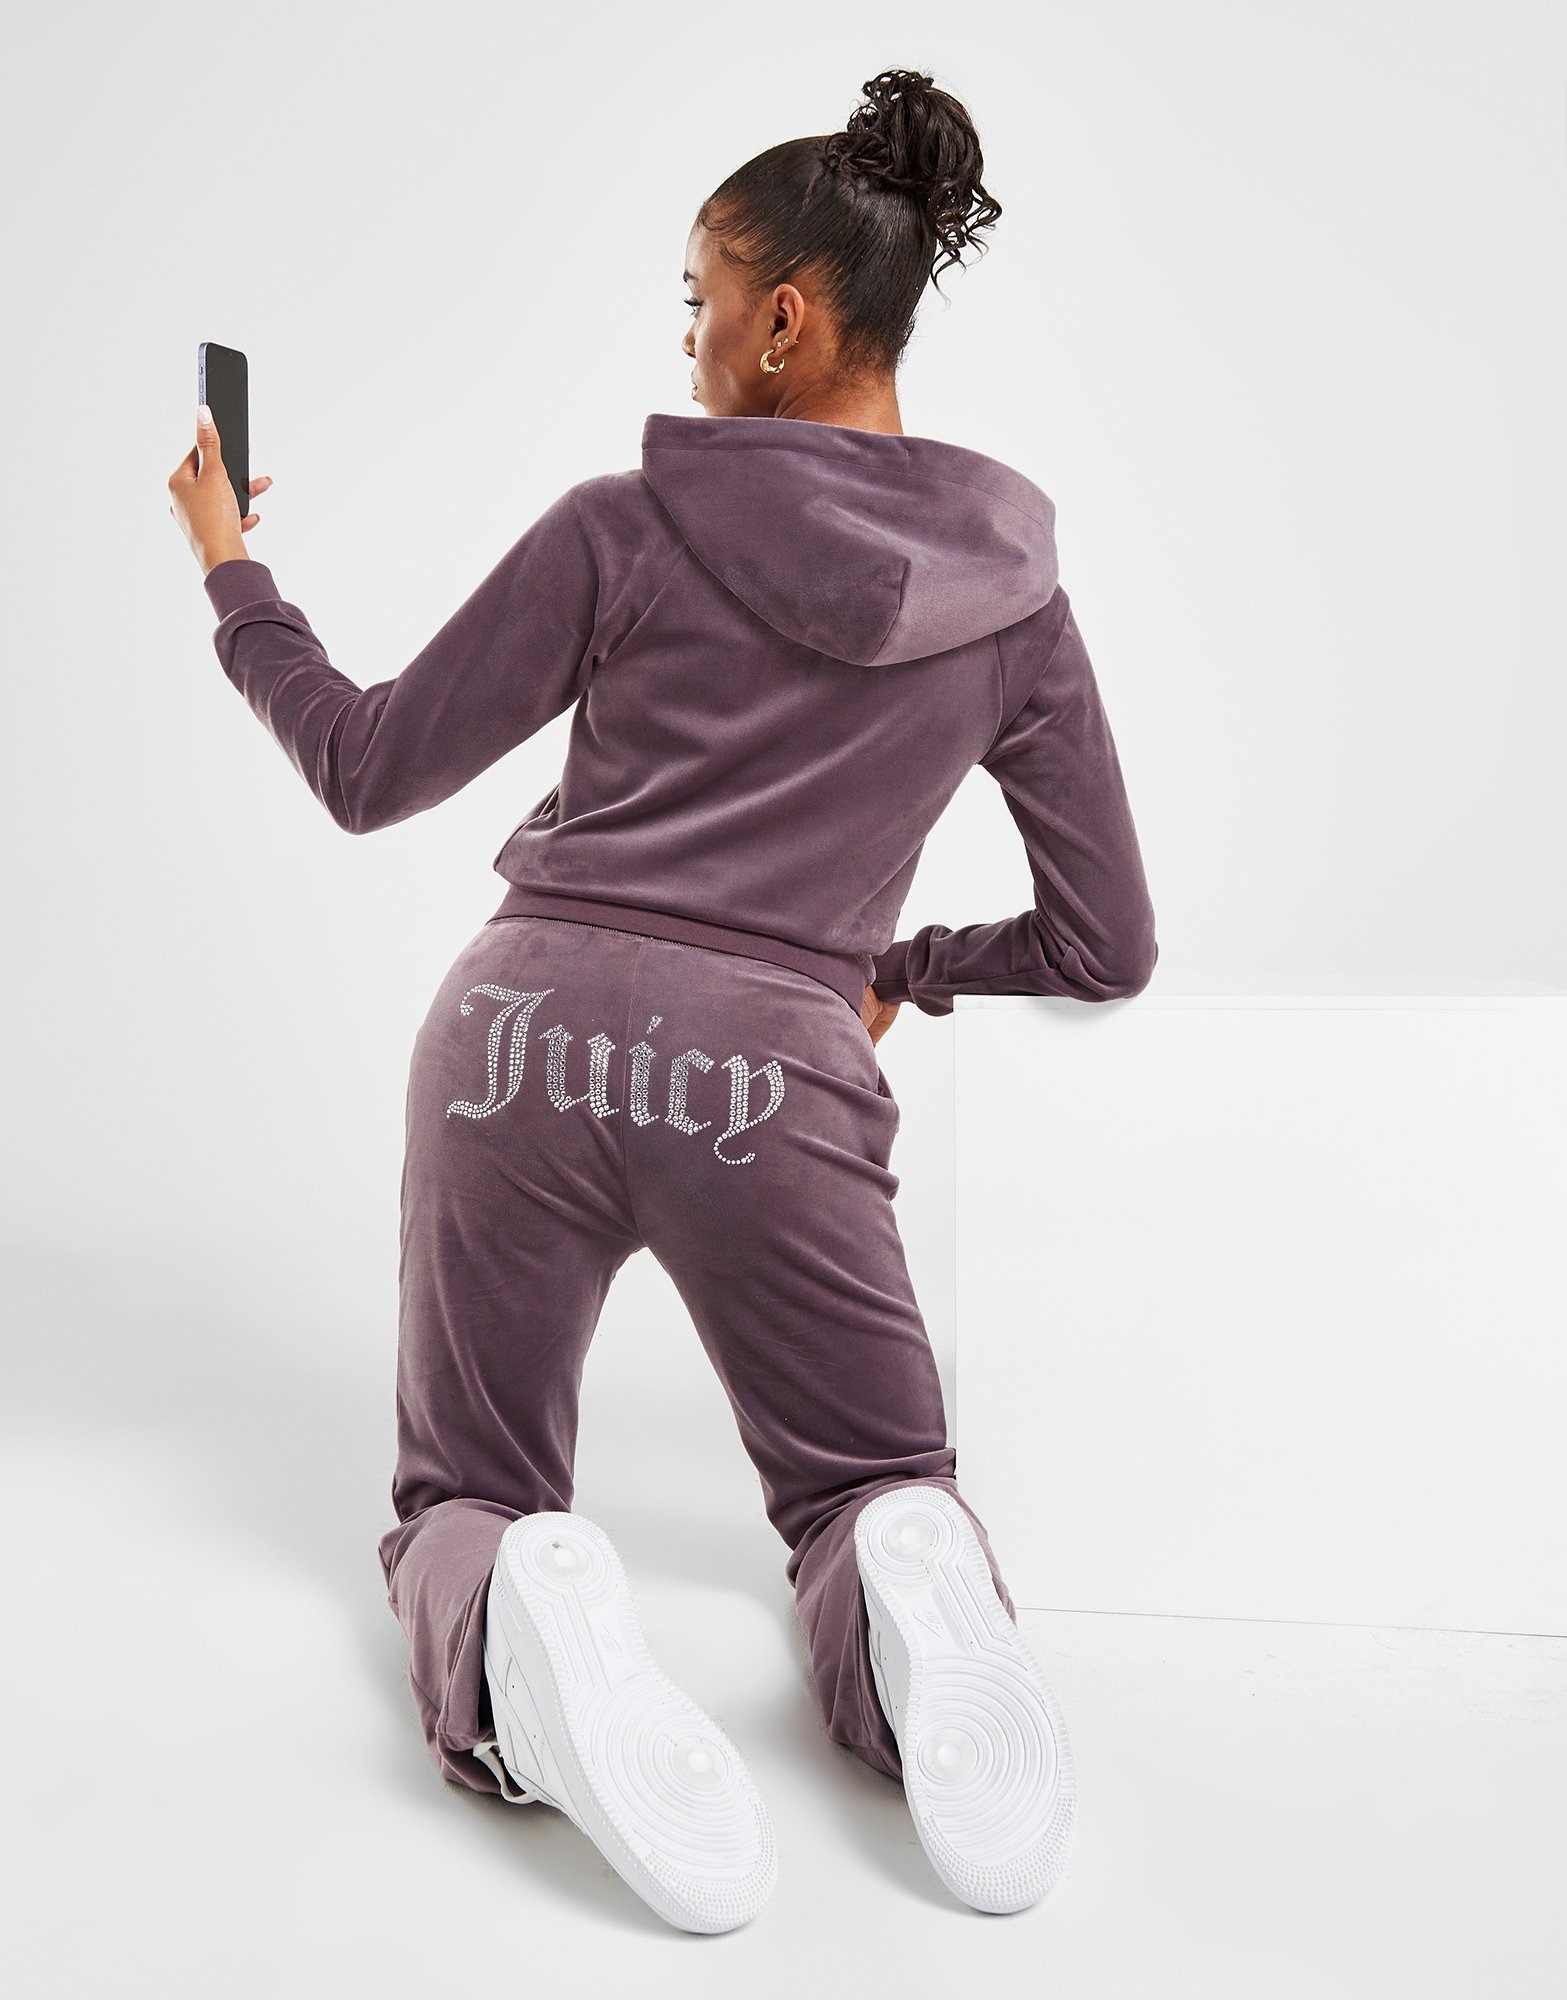 Women's Juicy Couture Tracksuits, T-shirts & Pants - JD Sports IE